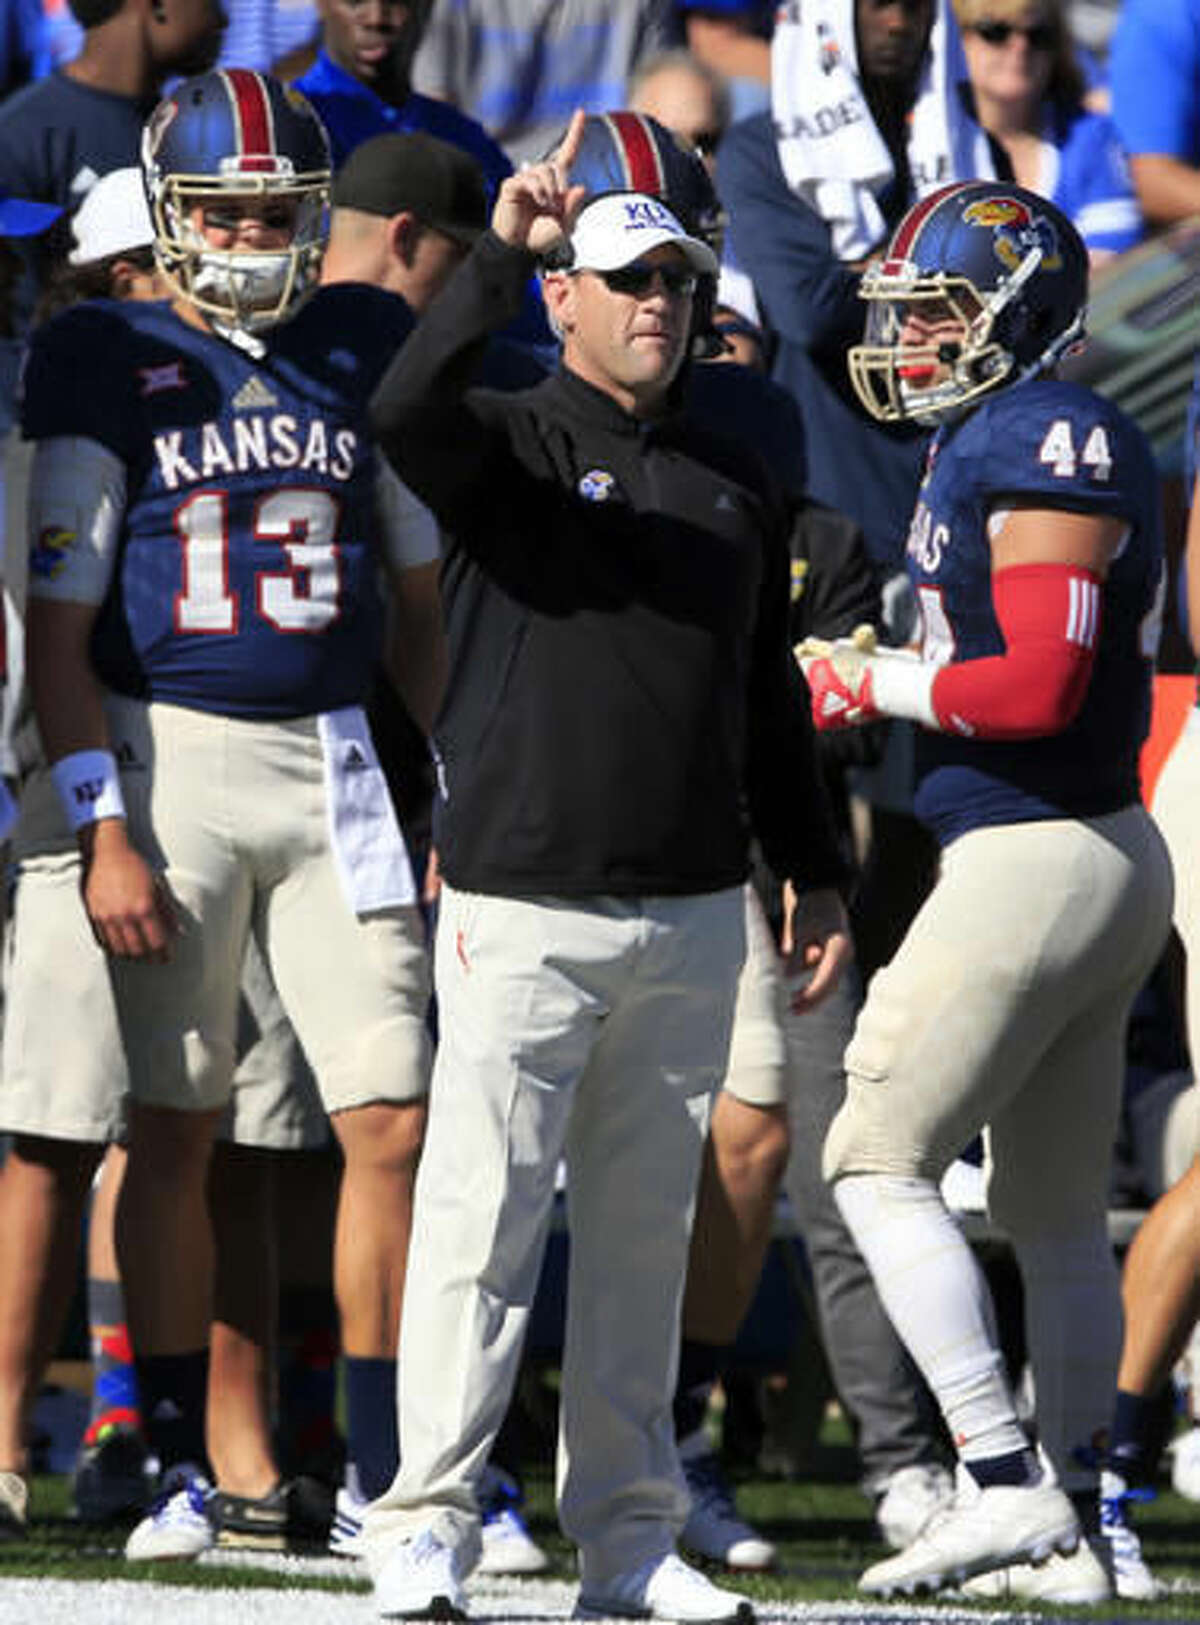 Kansas head coach David Beaty signals a play during the first half of an NCAA college football game against Oklahoma State in Lawrence, Kan., Saturday, Oct. 22, 2016. (AP Photo/Orlin Wagner)